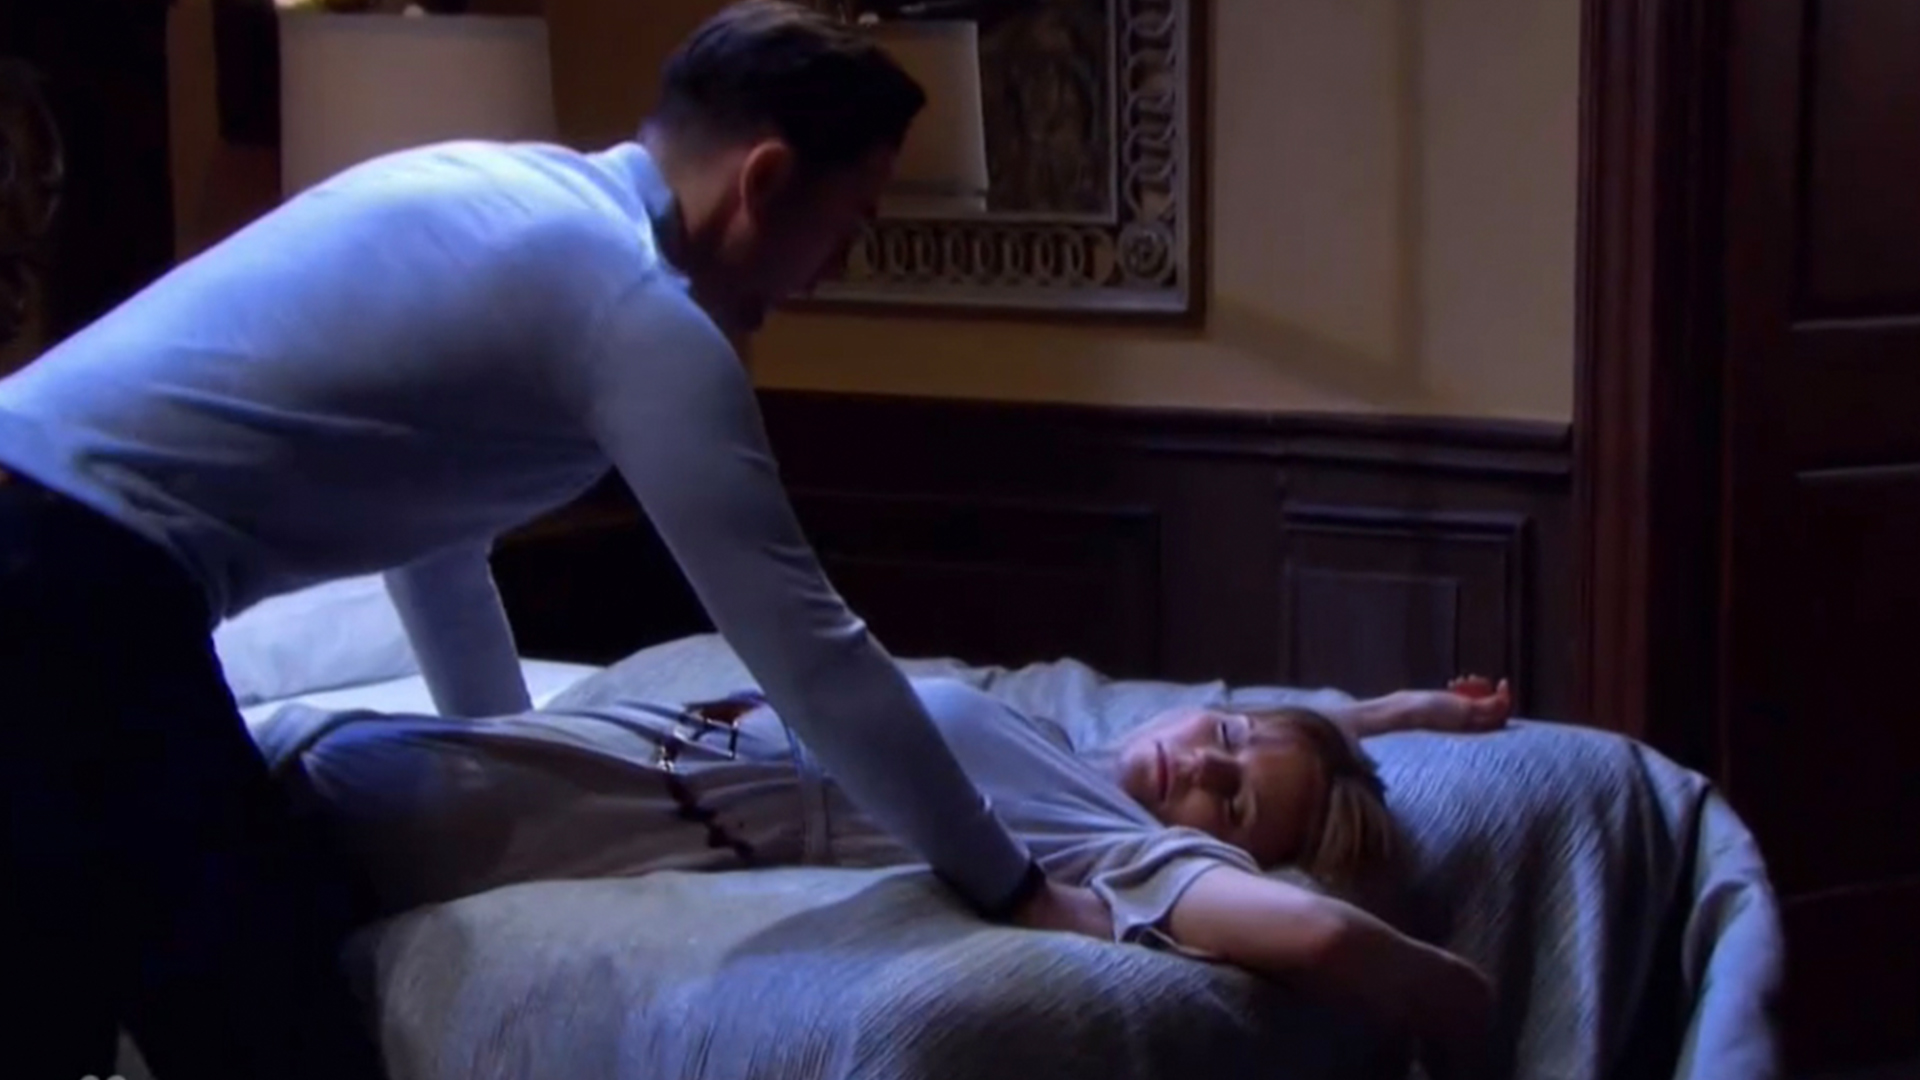 Days of Our Lives viewers spot ANOTHER clue as to who killed Abigail just before the episode was abruptly cut